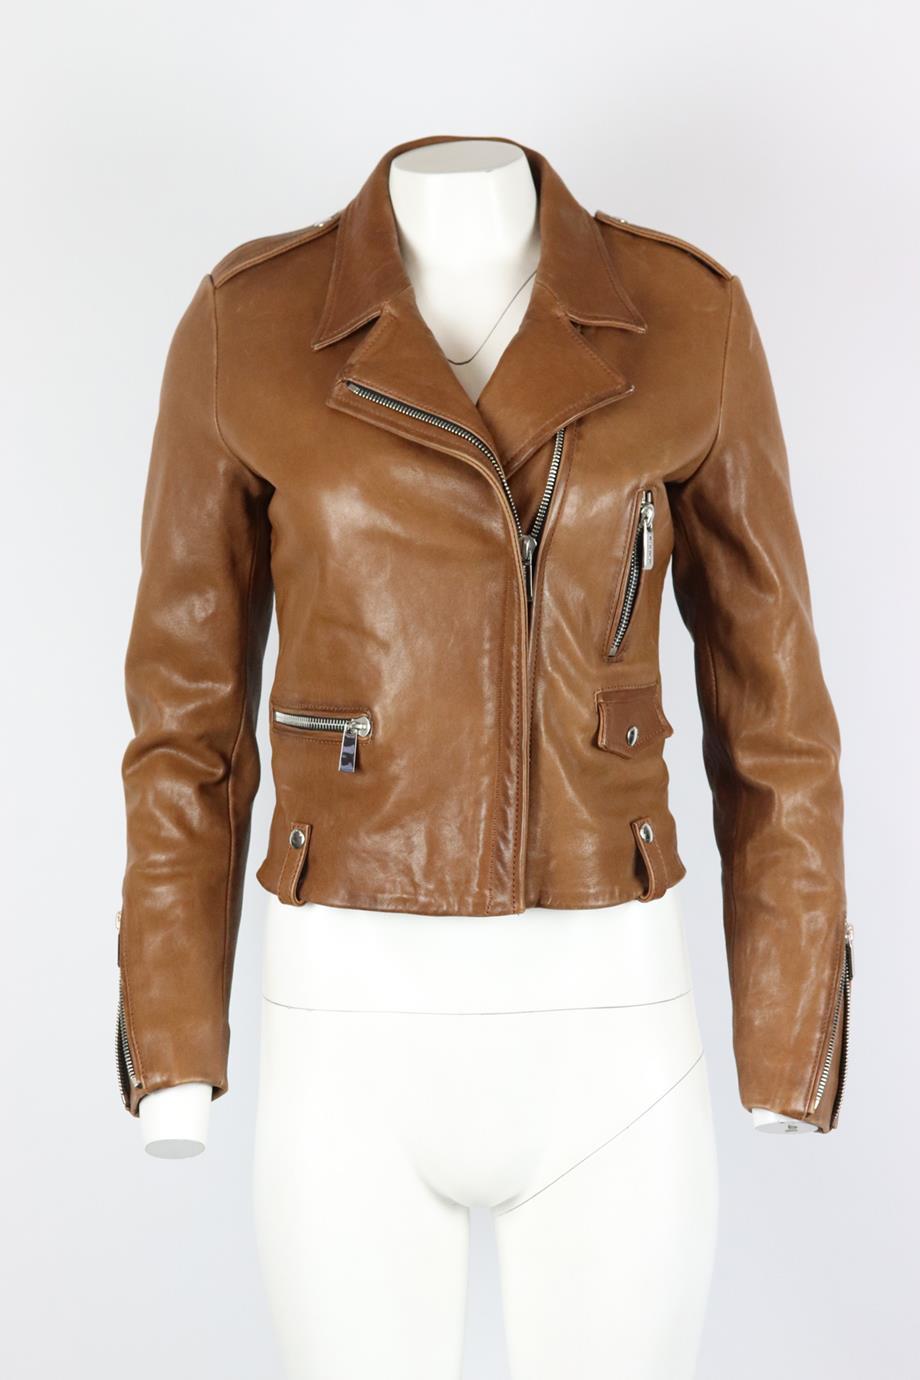 Barbara Bui leather biker jacket. Tan. Long sleeve, v-neck. Zip fastening at side. 100% Leather; lining: 100% acetate. Size: IT 40 (UK 8, US 4, FR 36) Shoulder to shoulder: 15.5 in. Bust: 35 in. Waist: 32 in. Hips: 32 in. Length: 21 in. New with